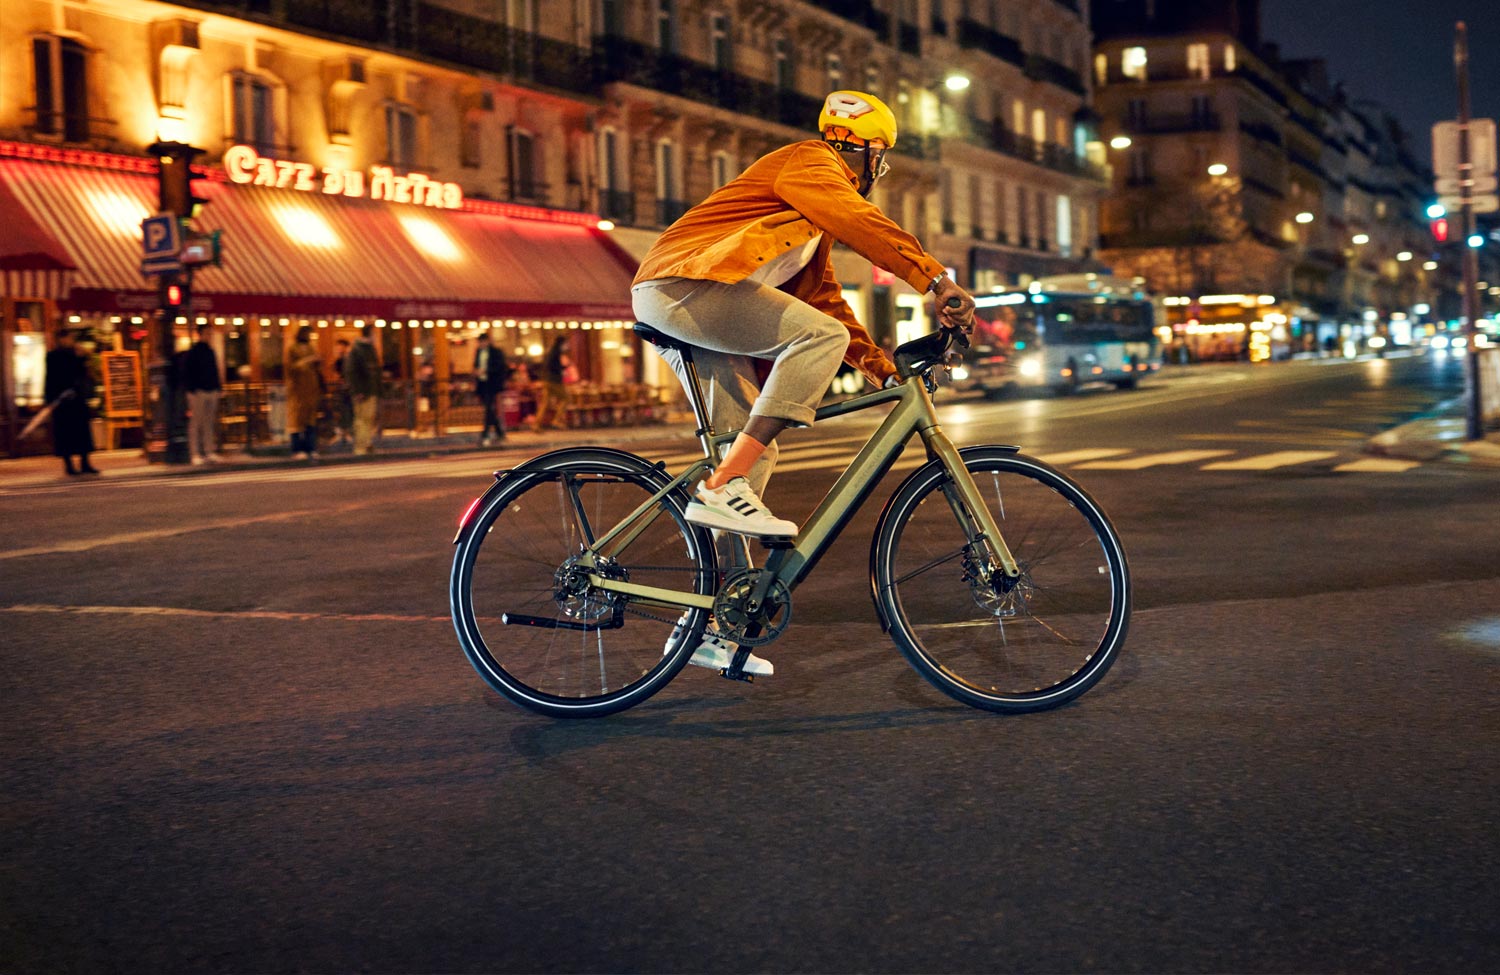 UBN — Riese & Müller's new Urban series features agile ebikes with smart features